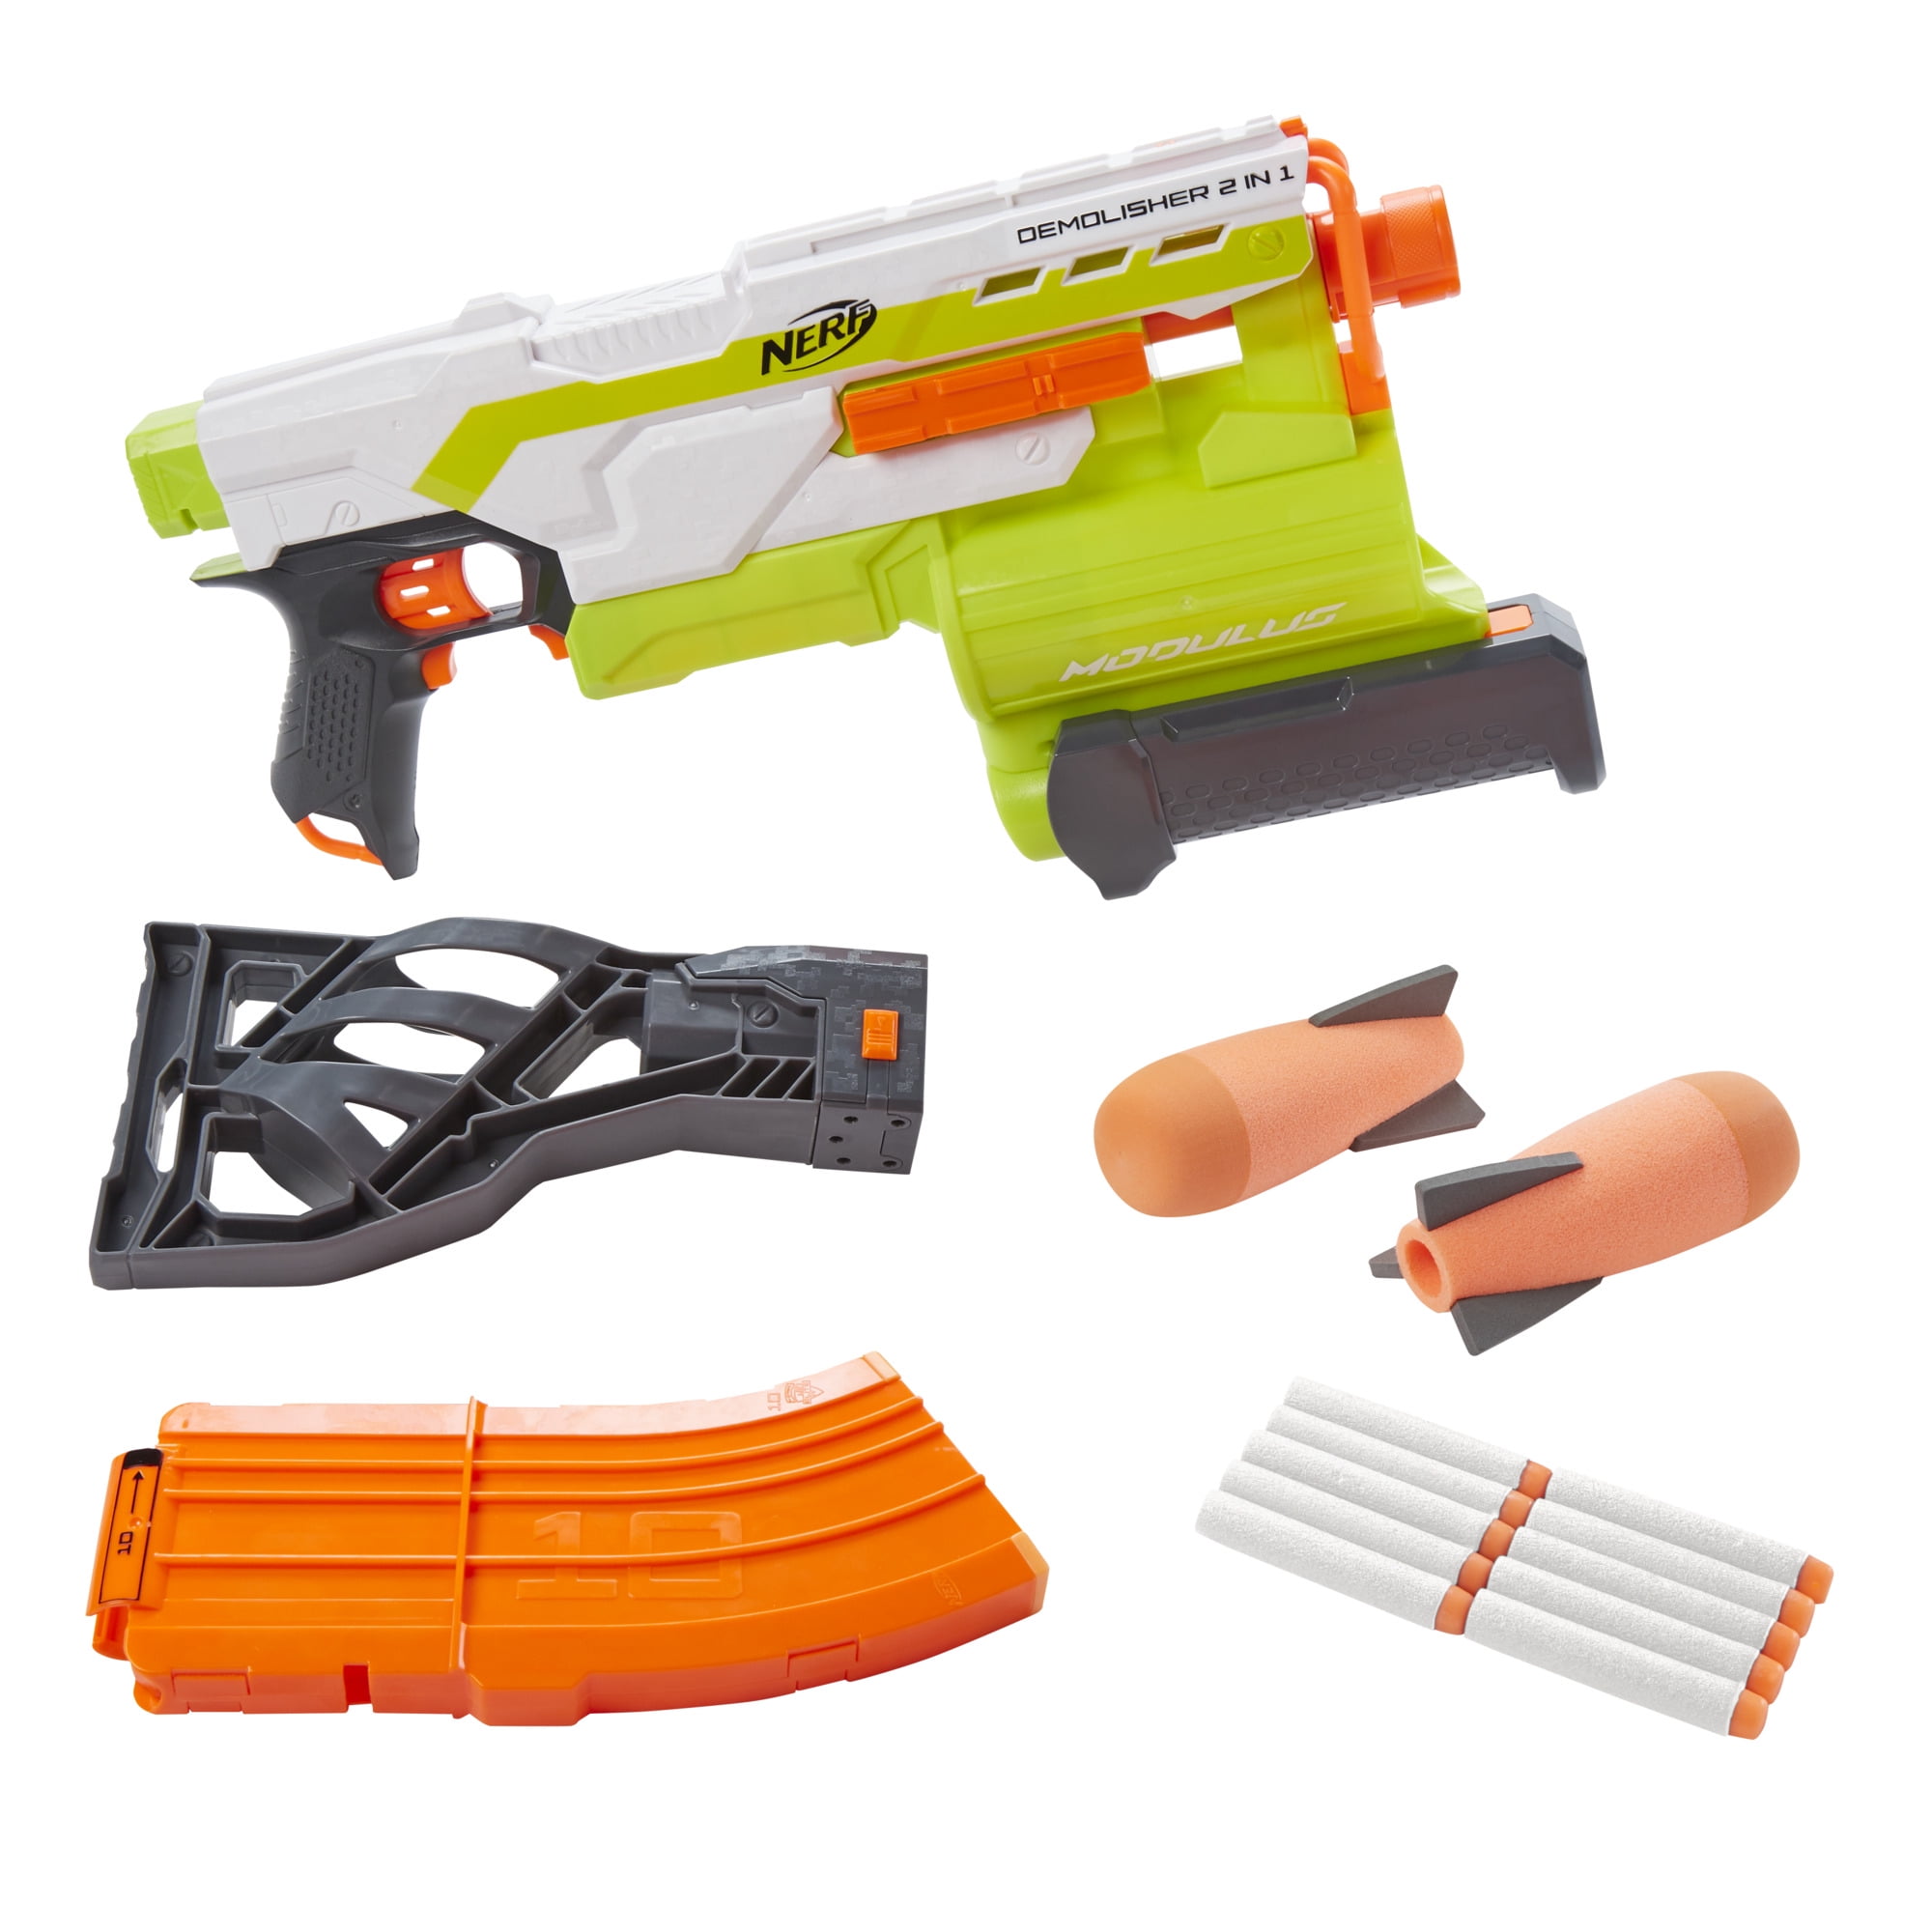 Nerf Demolisher 2-in-1 Motorized Blaster Fires and Rockets -